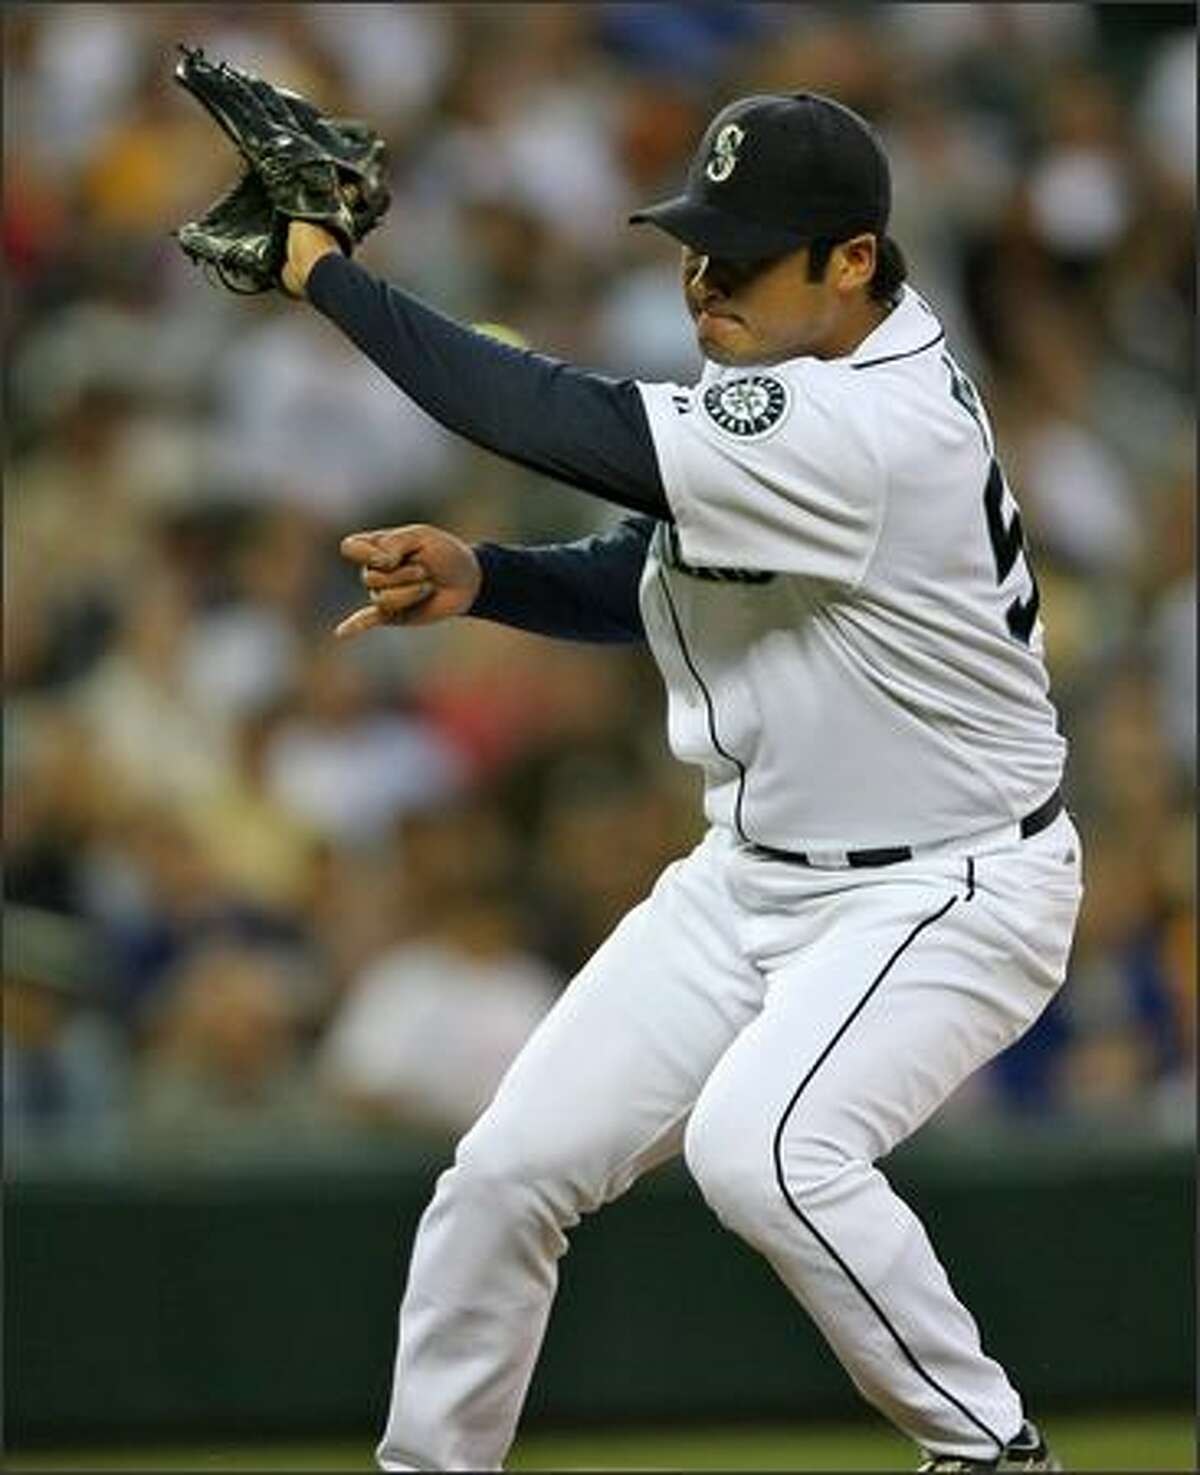 Seattle Mariners Cha Seung Baek stops a hard grounder from Texas Rangers' Marlon Byrd during the sixth inning at Safeco Field.